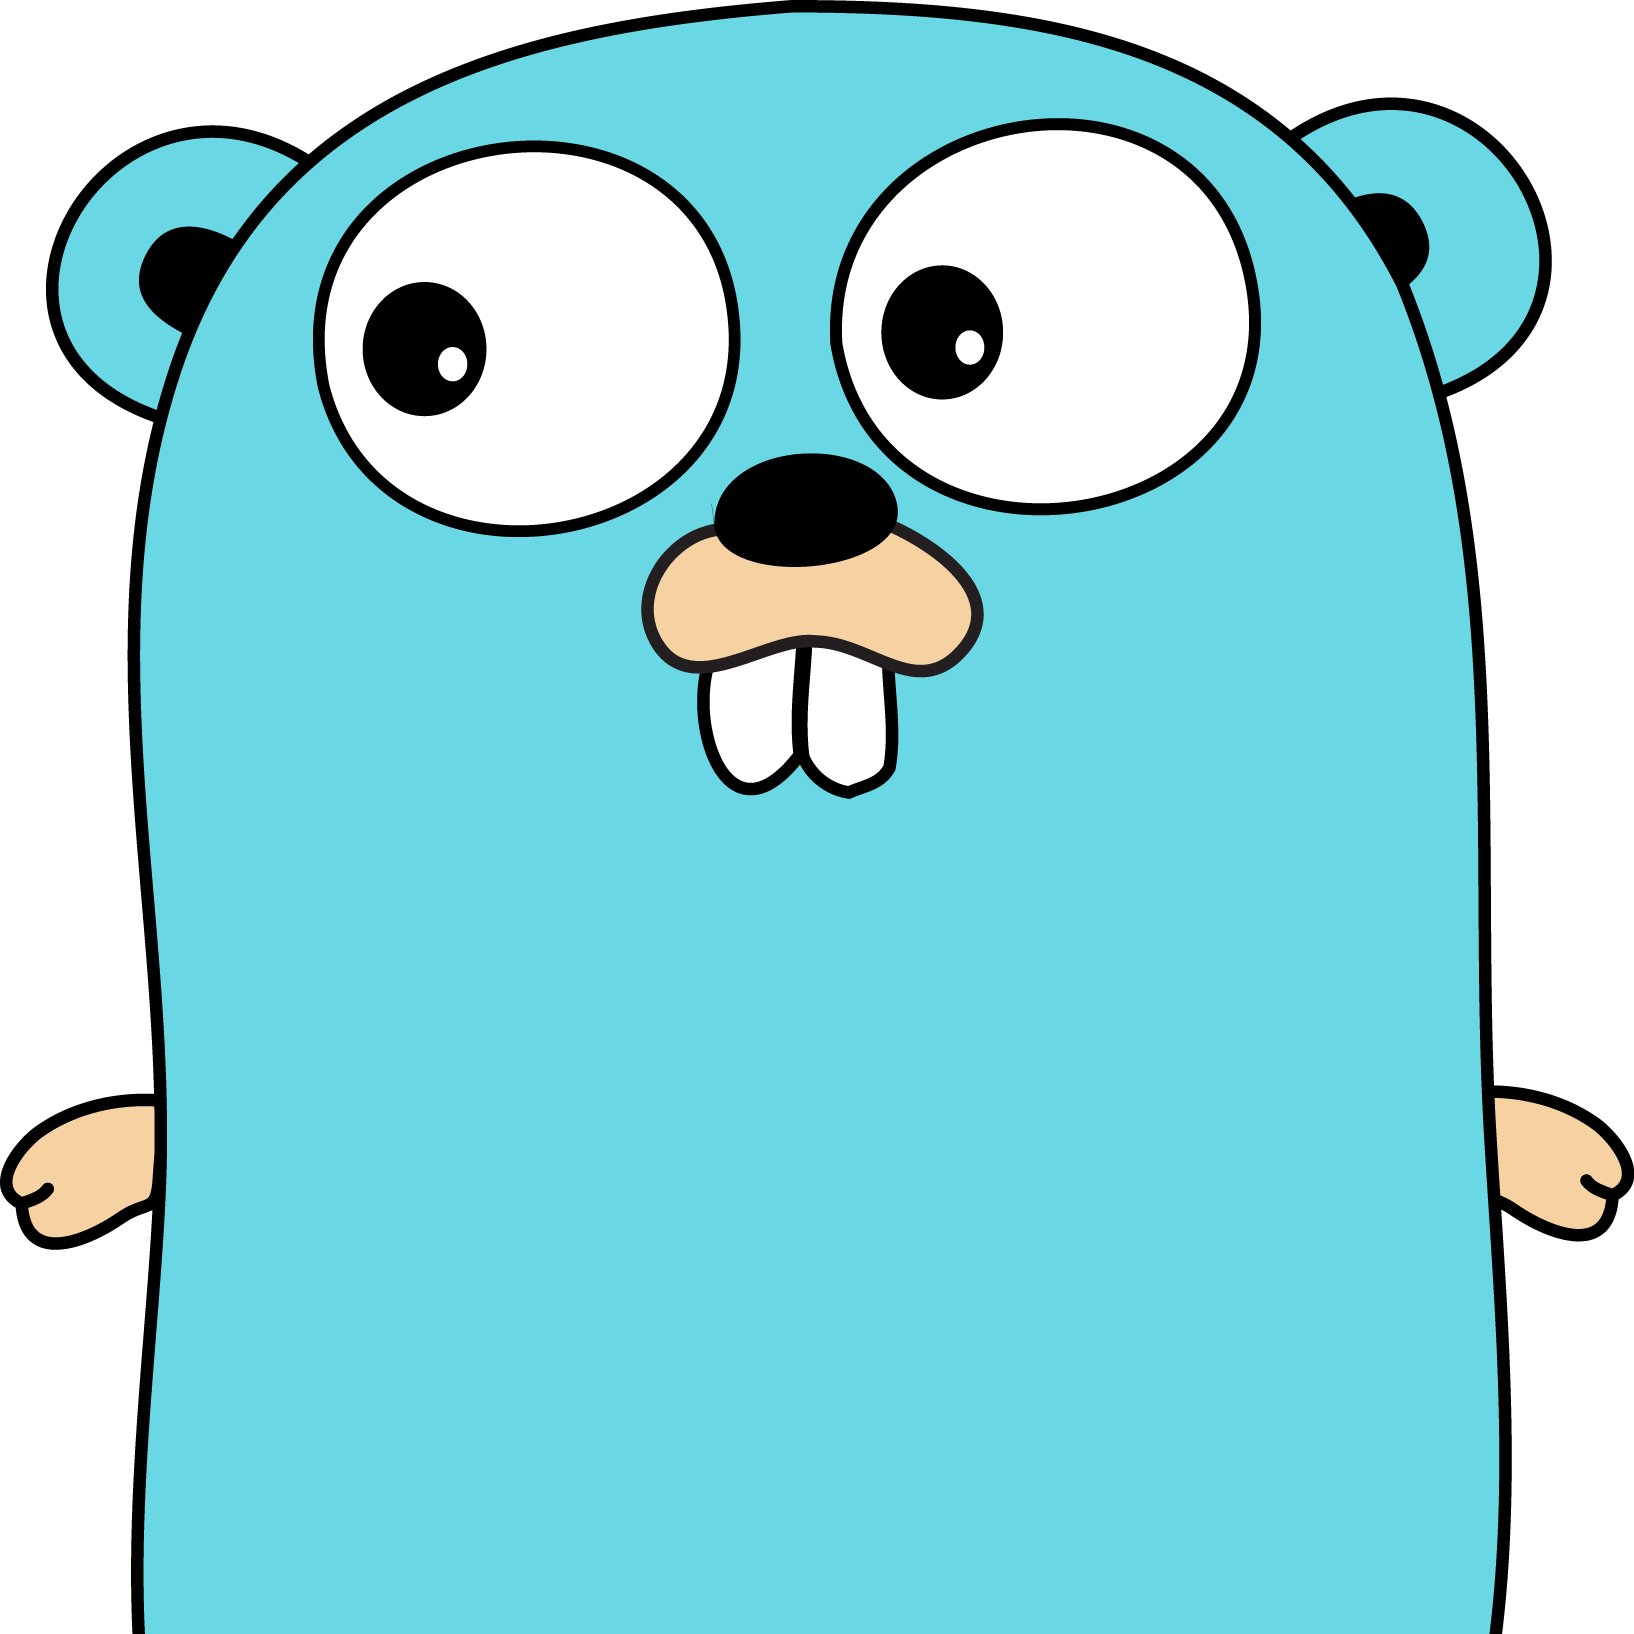 Munich Golang GDG  #golang #munich #gophers  

Organised by @lc0d3r and @domrdy